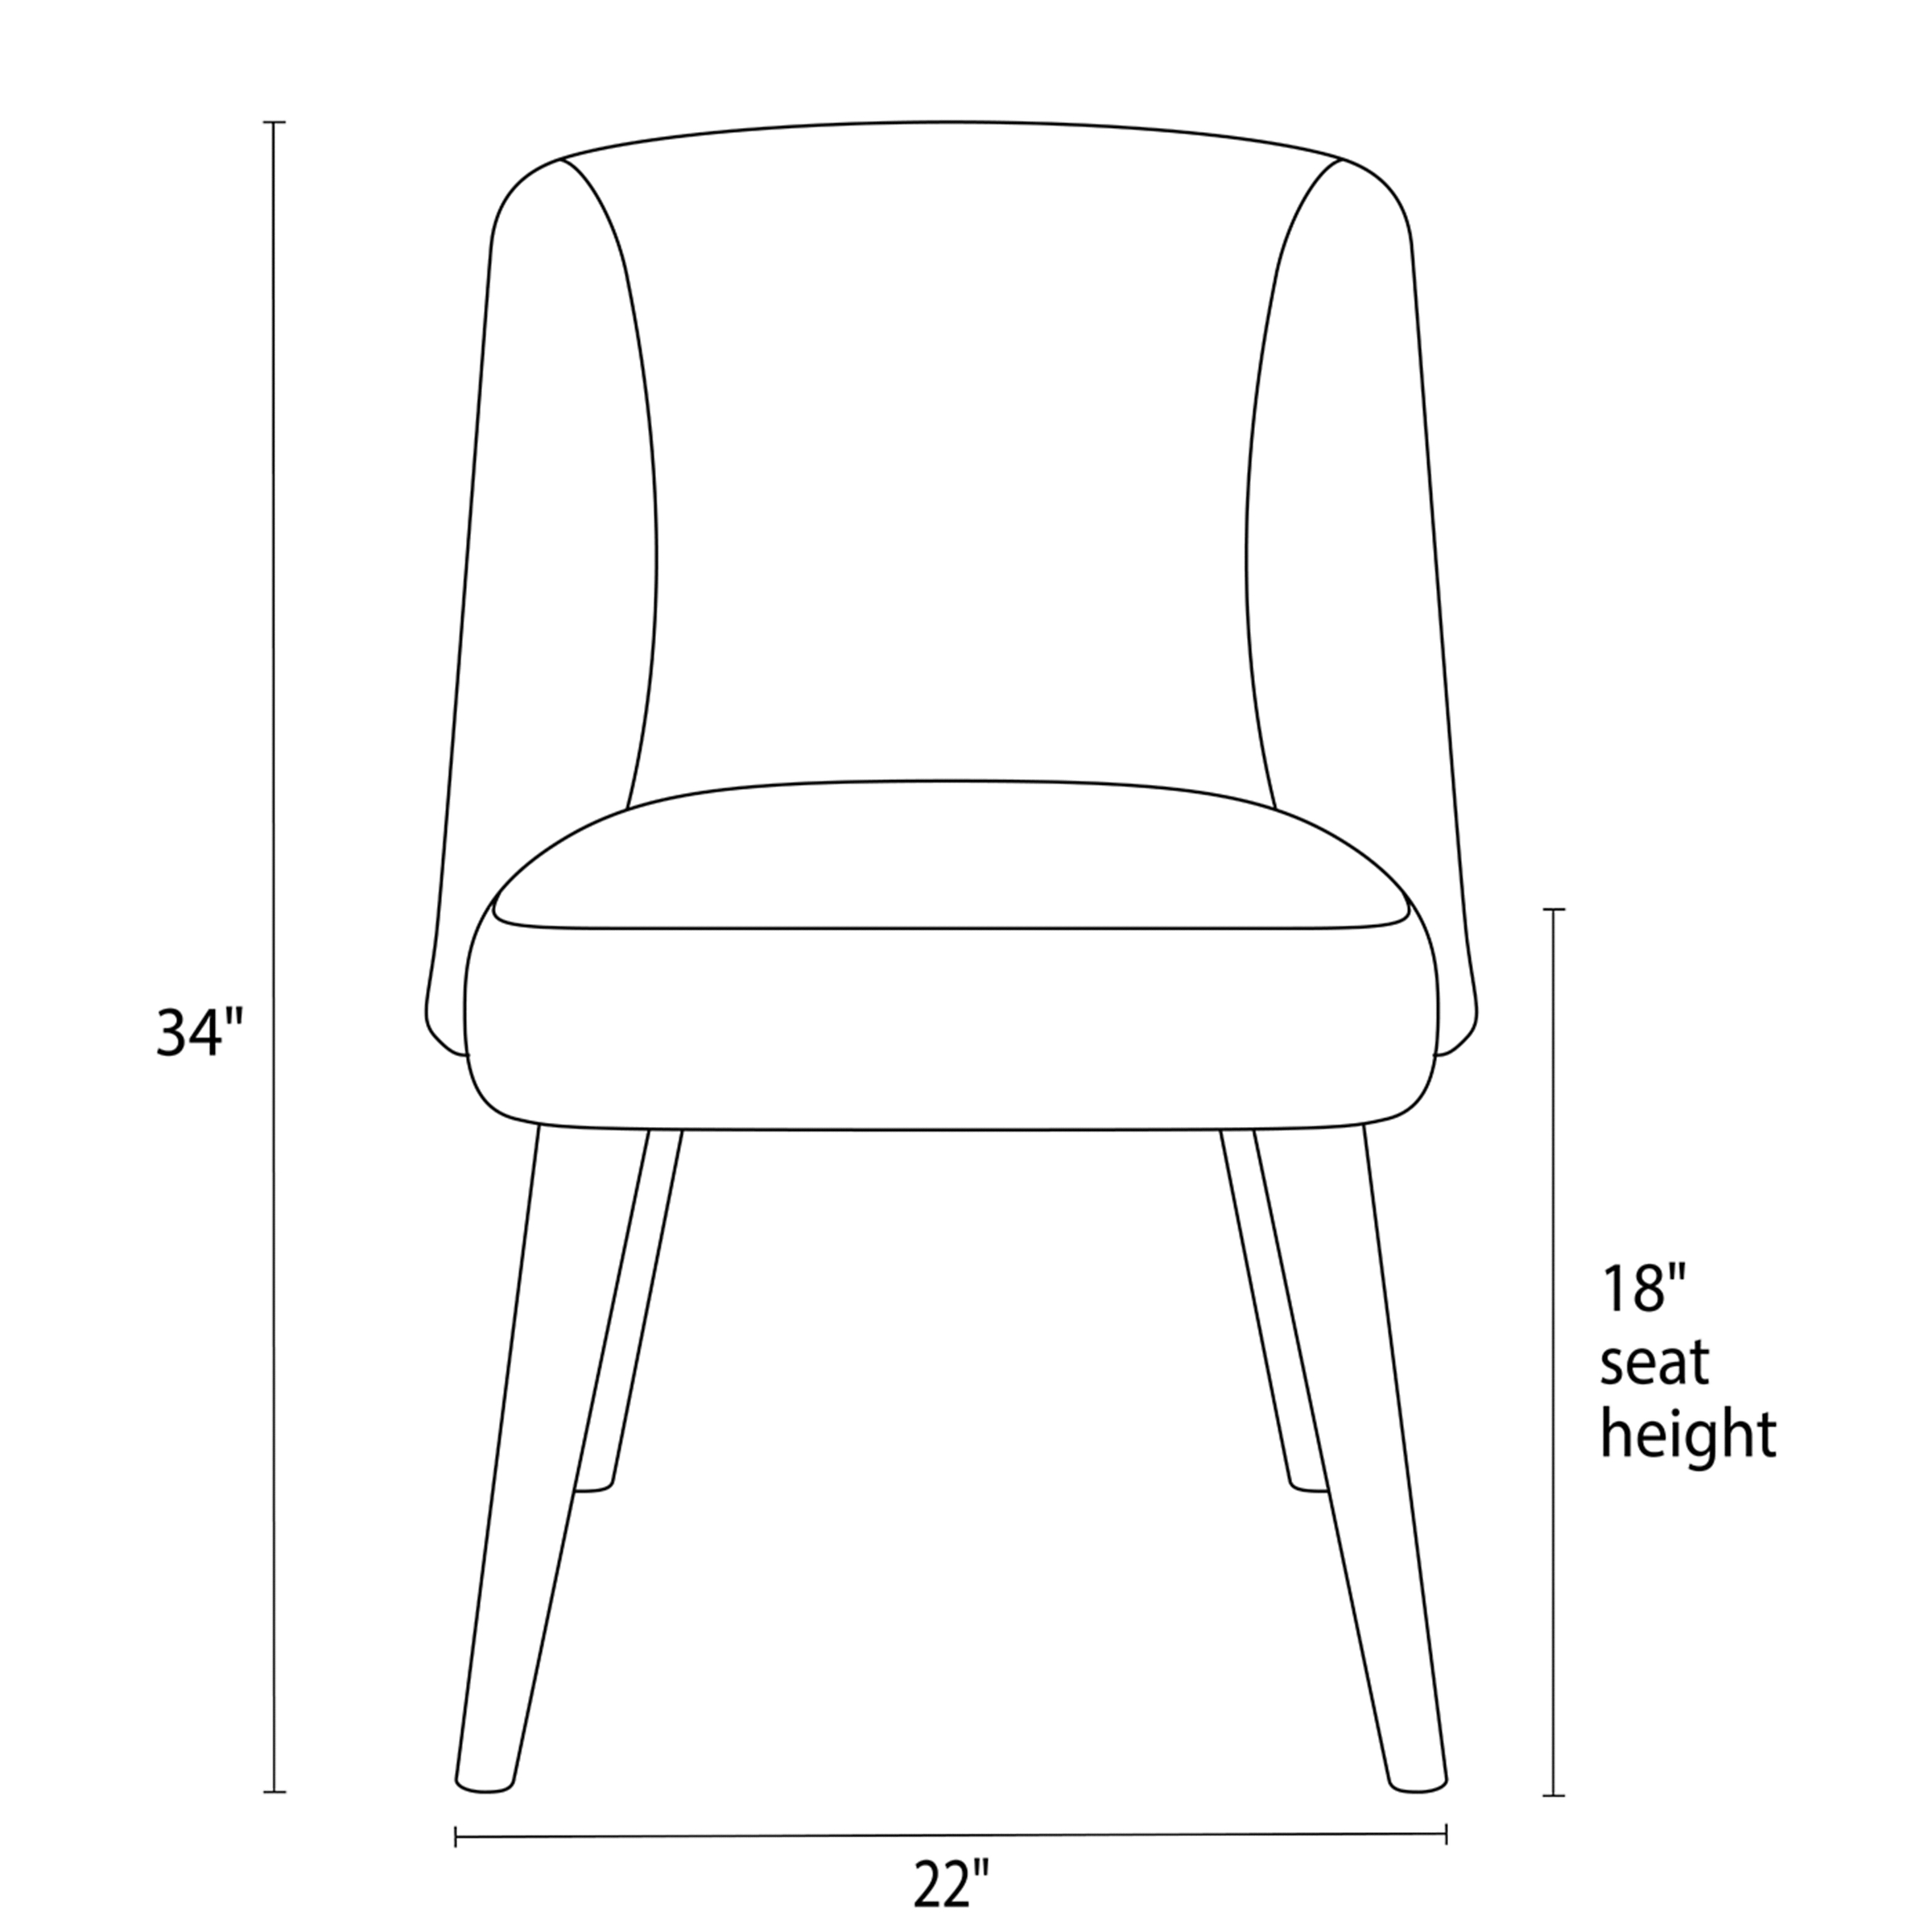 Front view dimension illustration of Cora dining chair.